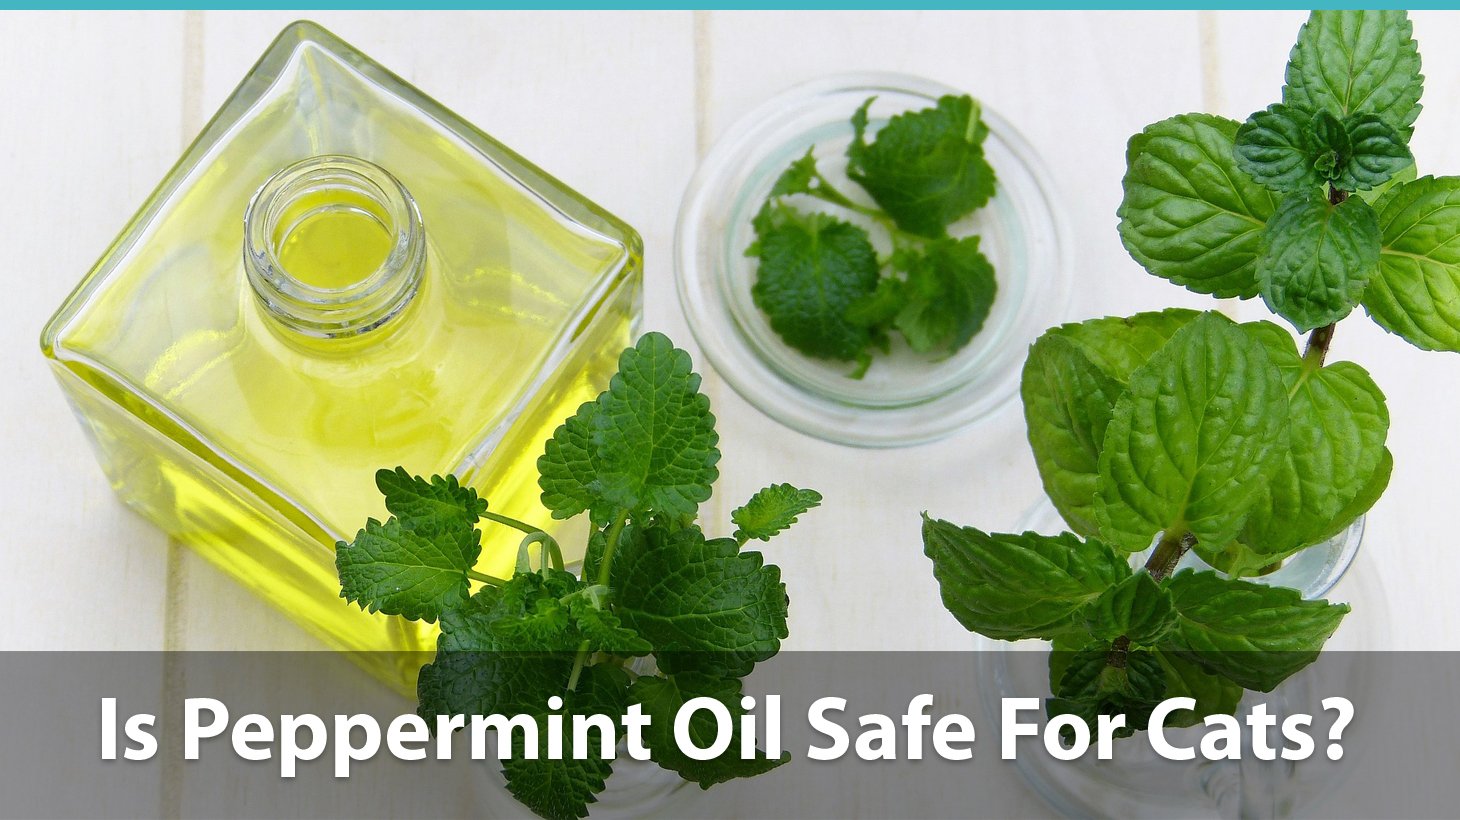 Is Peppermint And Peppermint Oil Safe For Cats Or Is It Bad For Them?